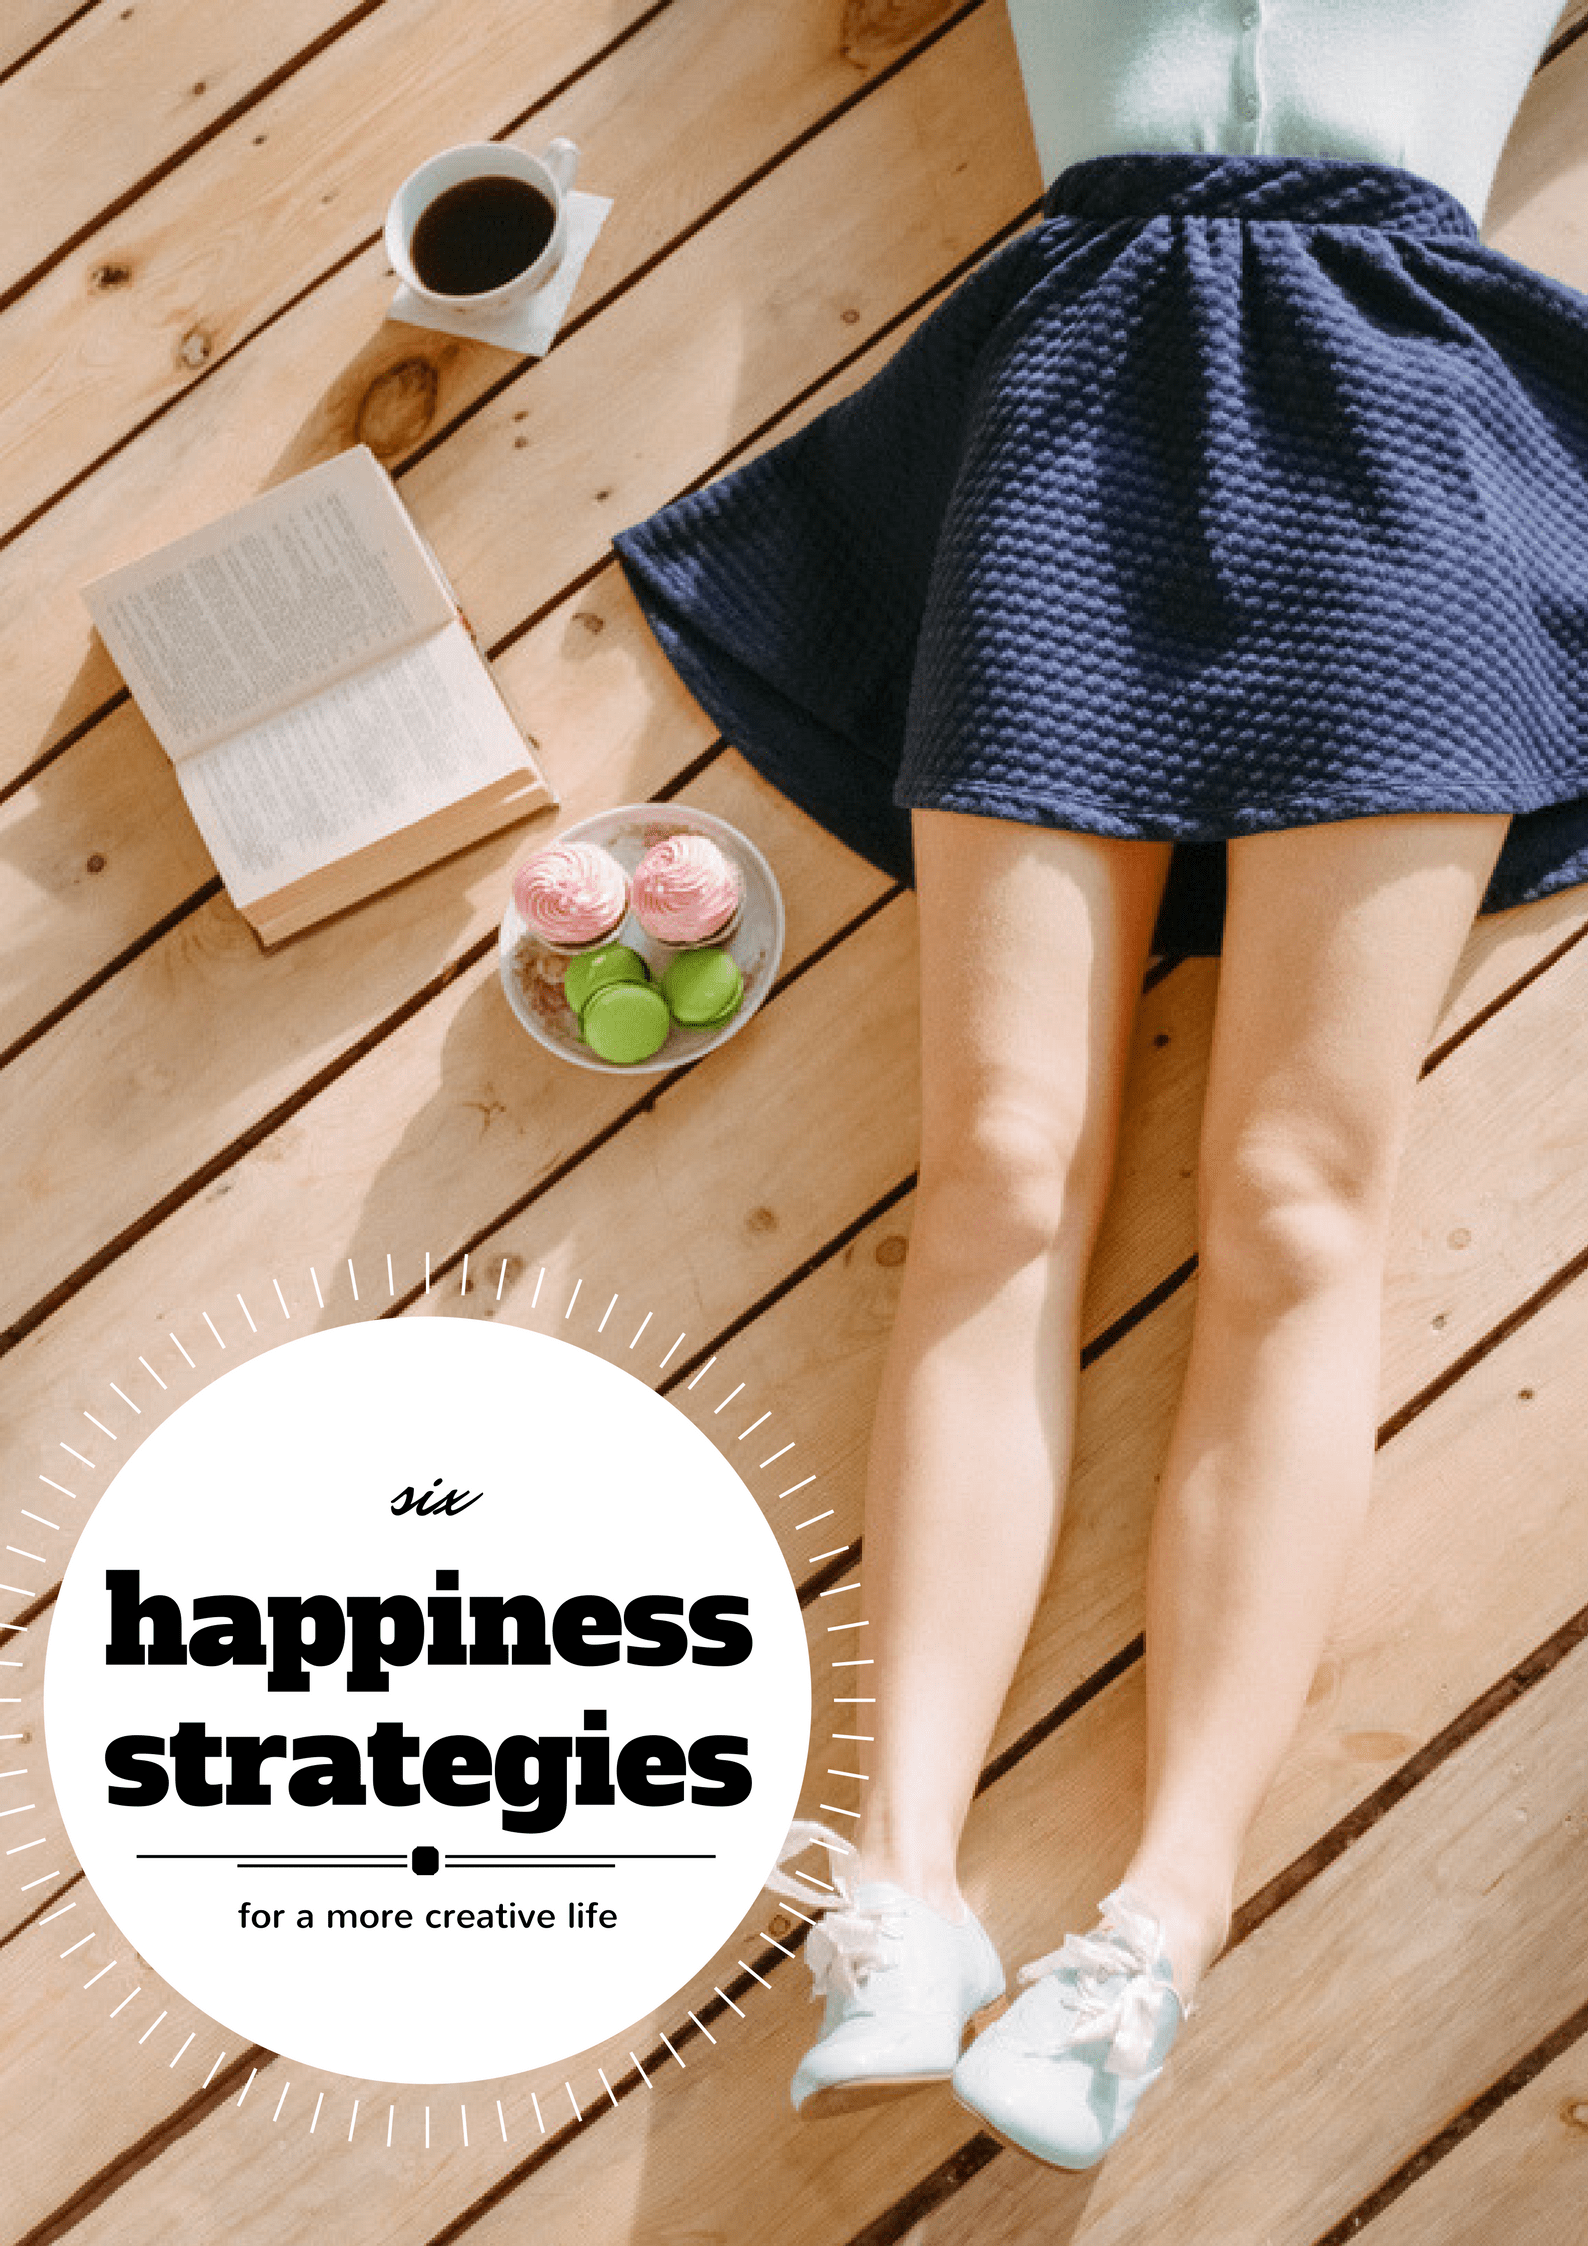 Happiness Strategies from MomAdvice.com